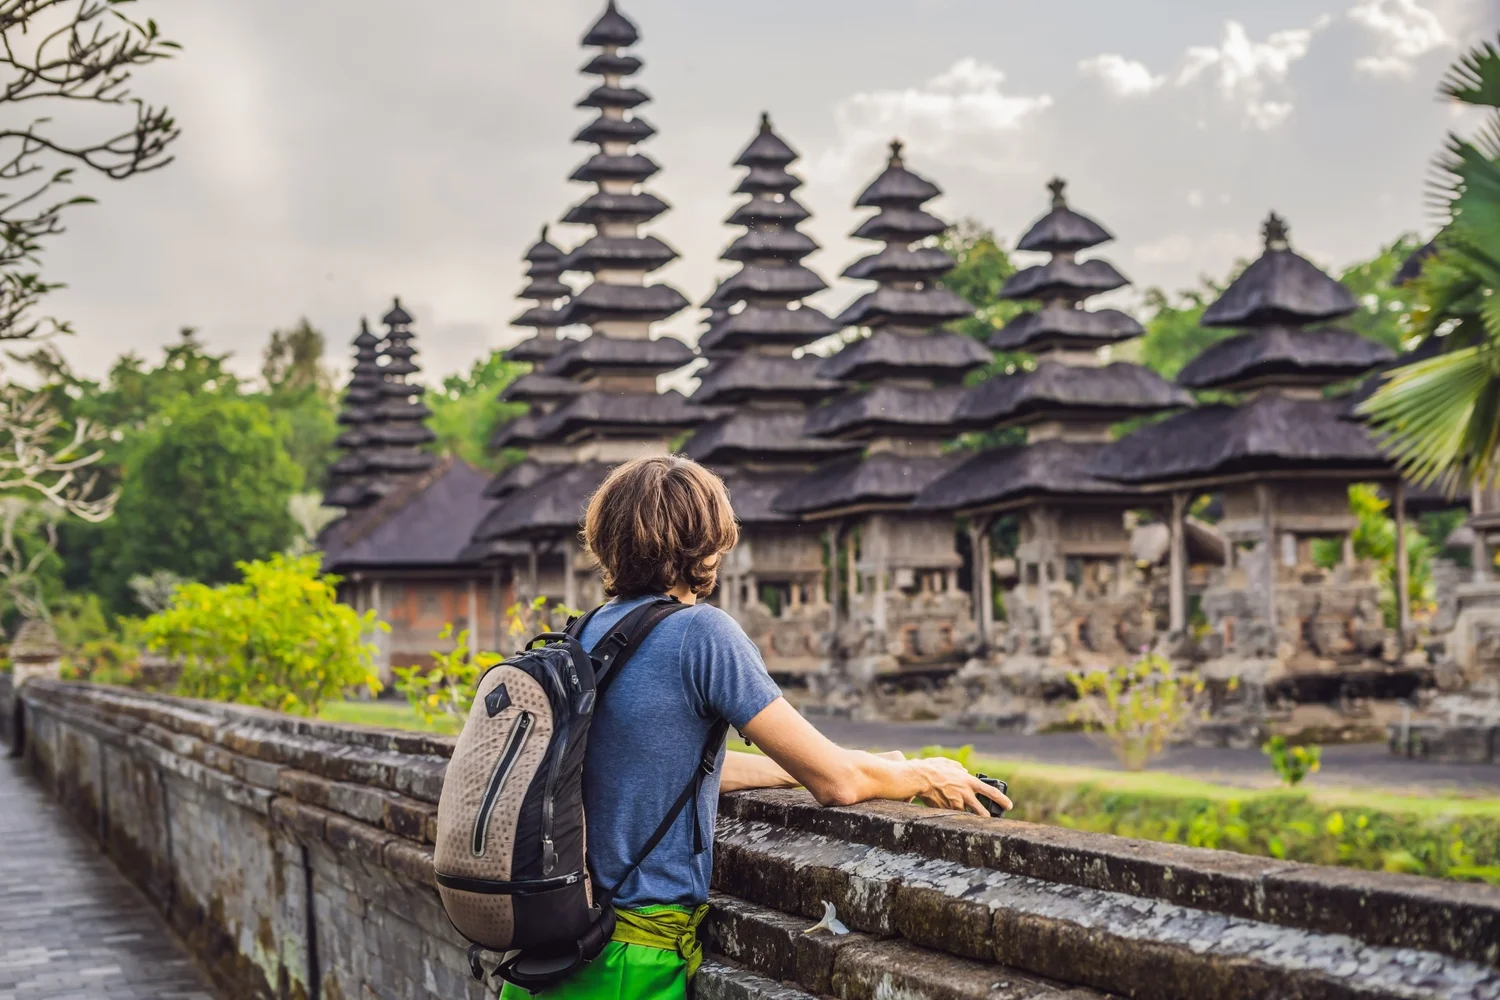 Bali Charm: Full-Day Bedugul and Tanah Lot Tour - All Inclusive Tickets